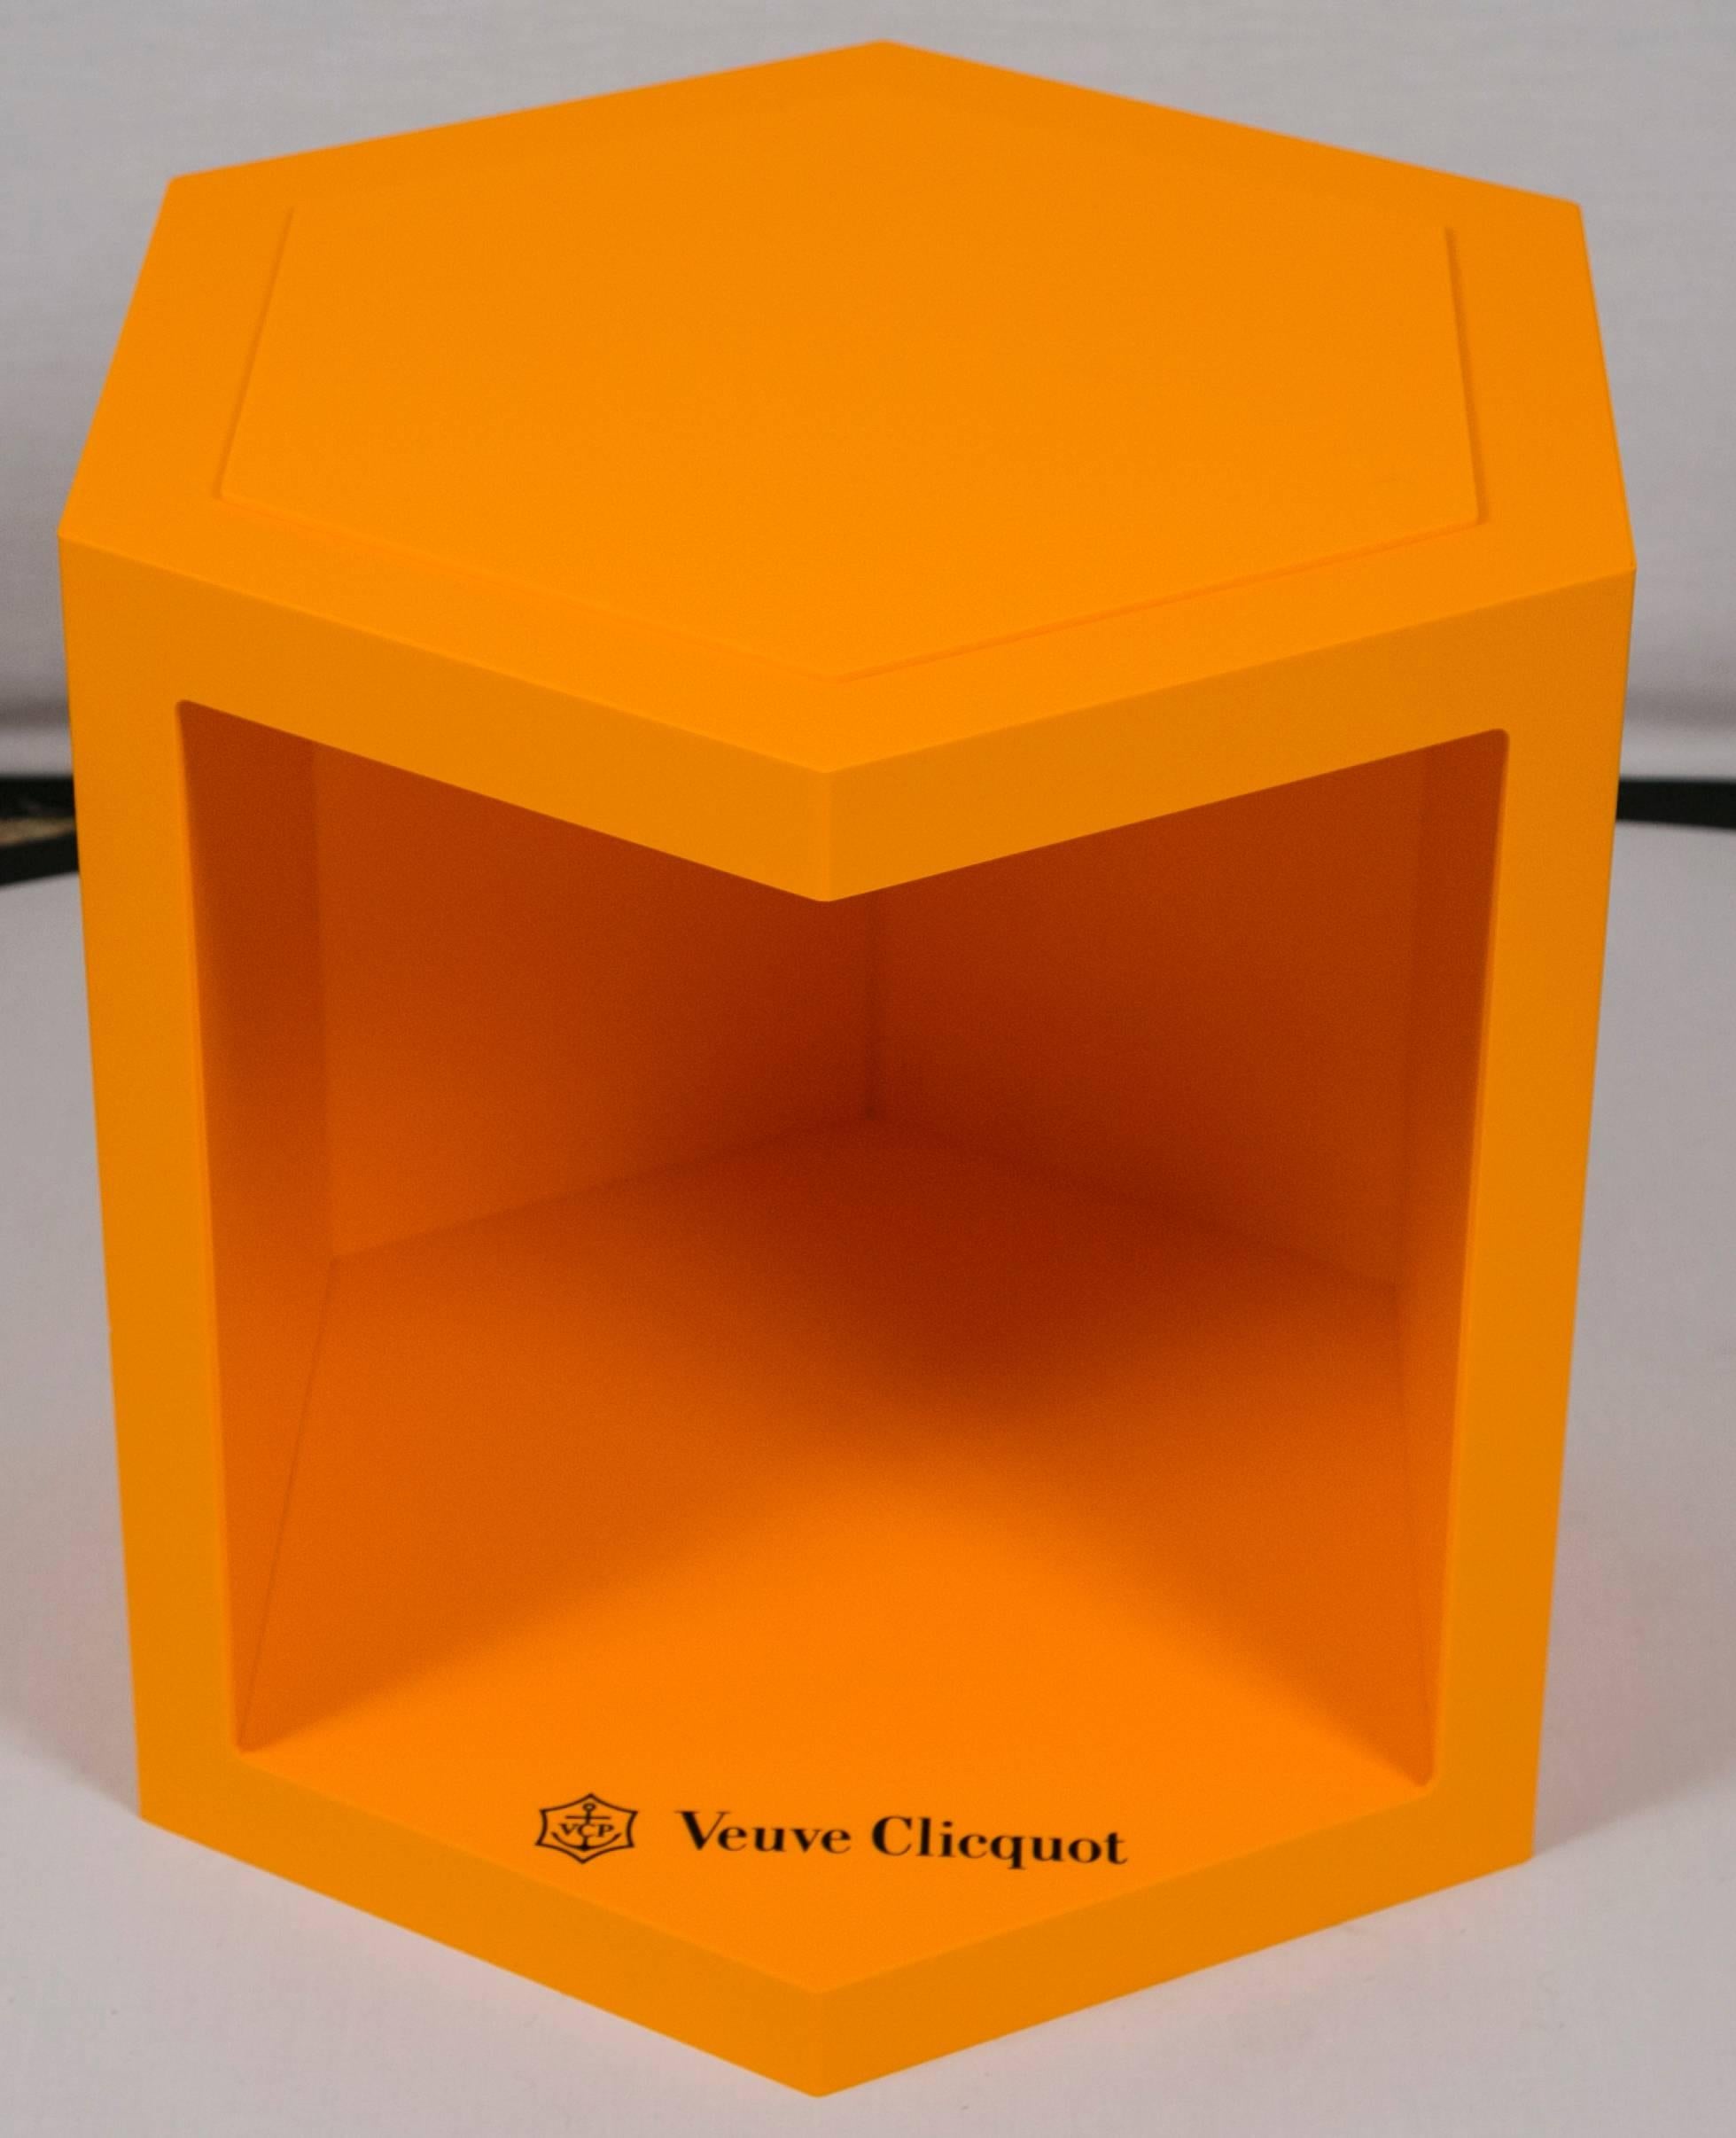 French Veuve Clicquot Promotional Display Box